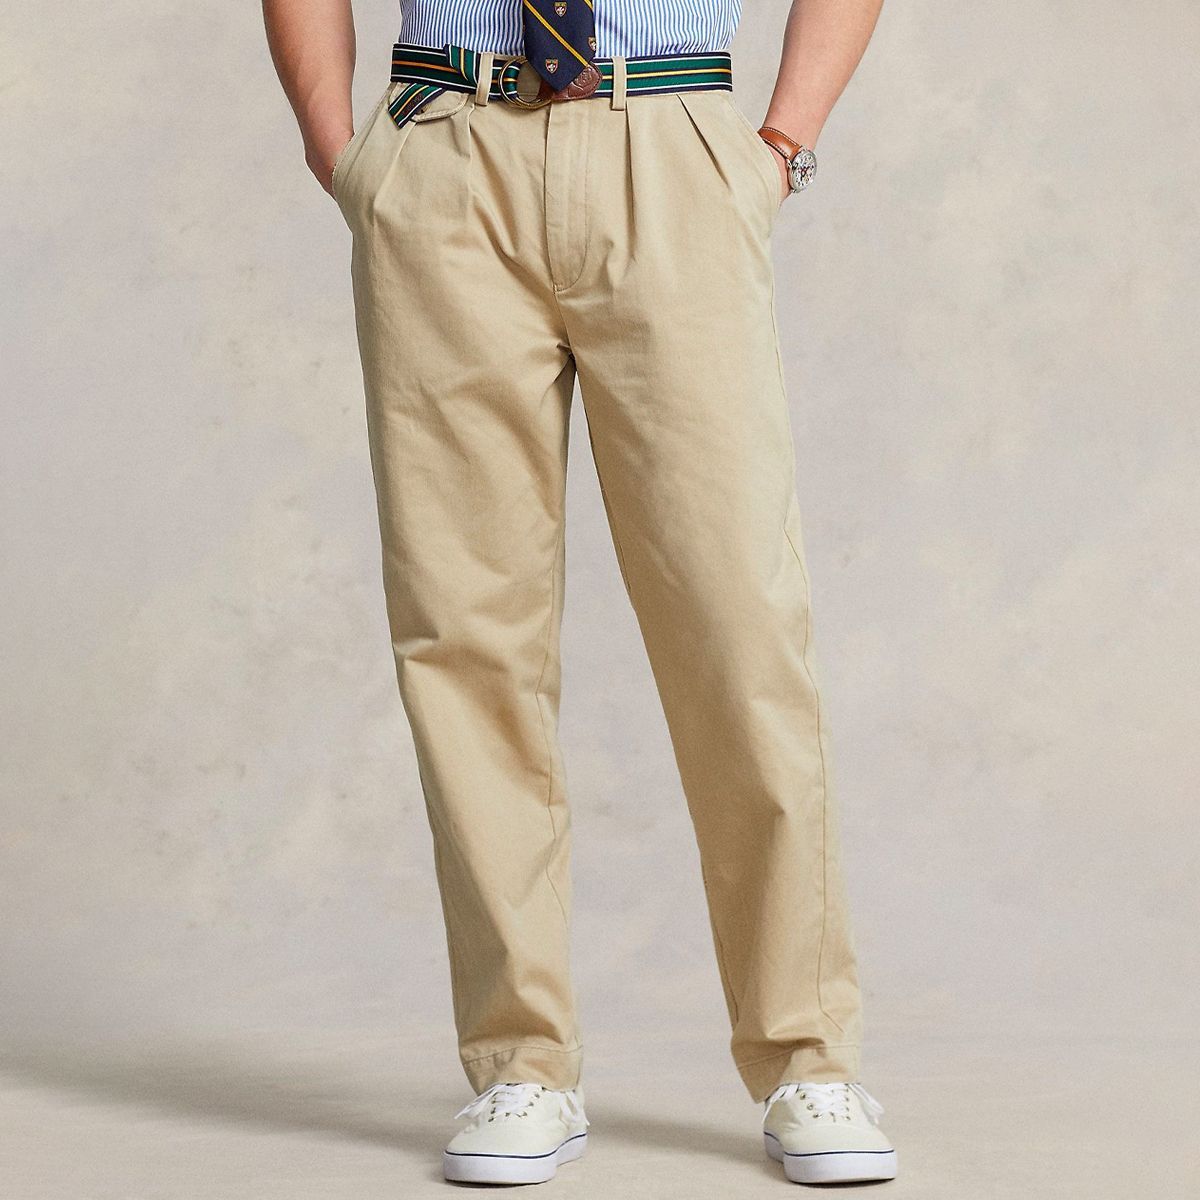 Men's Baggy Chinos - Etsy